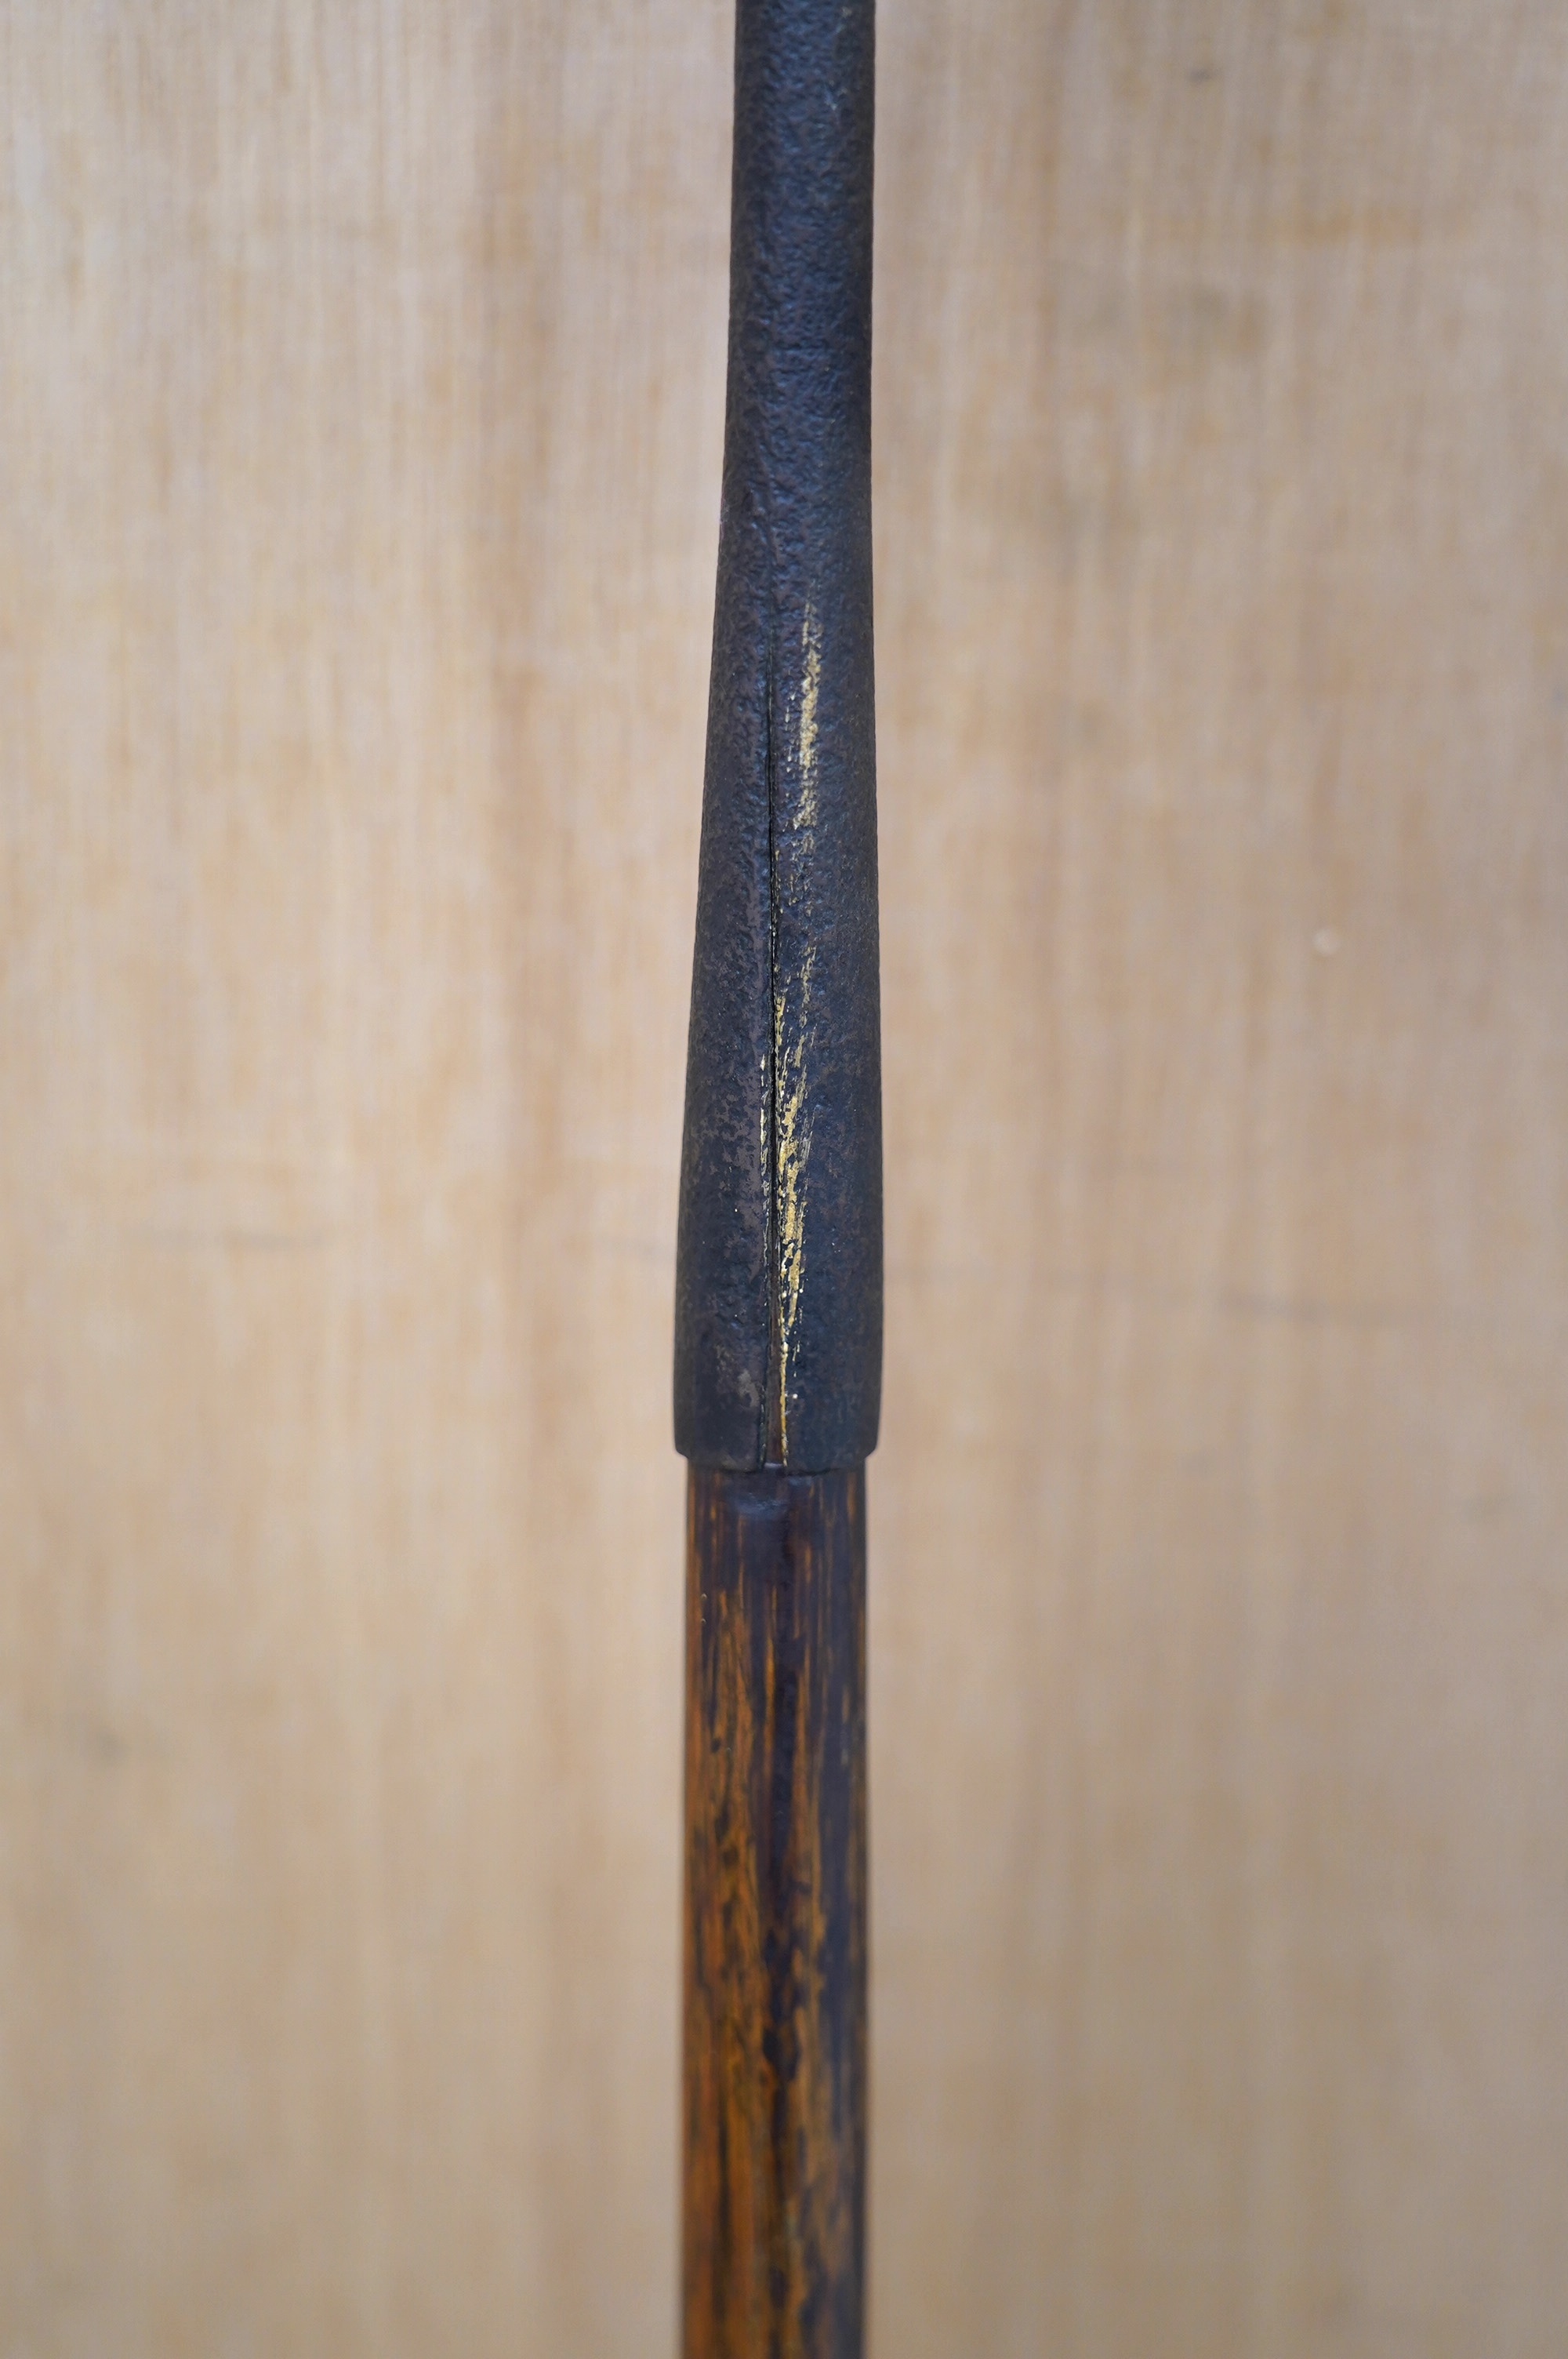 A Maasai spear with iron head, 214cm. Condition - fair, heavily pitted